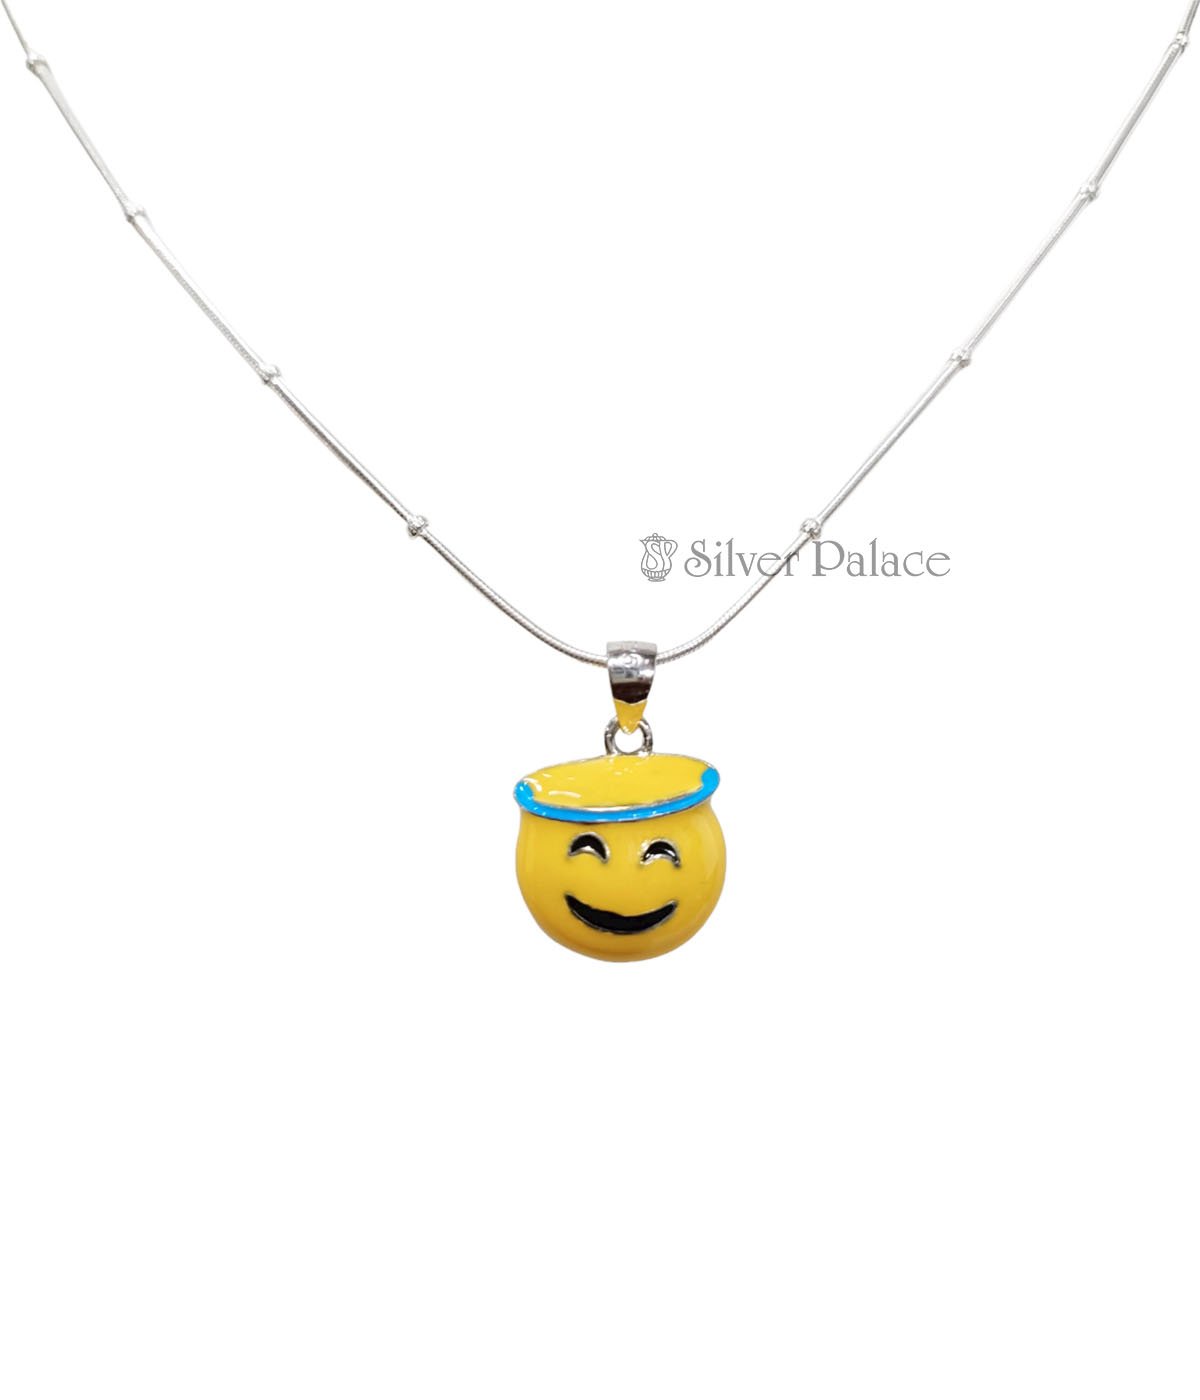 92.5 STERLING SILVER SMILING FACE WITH HALO PENDANT 